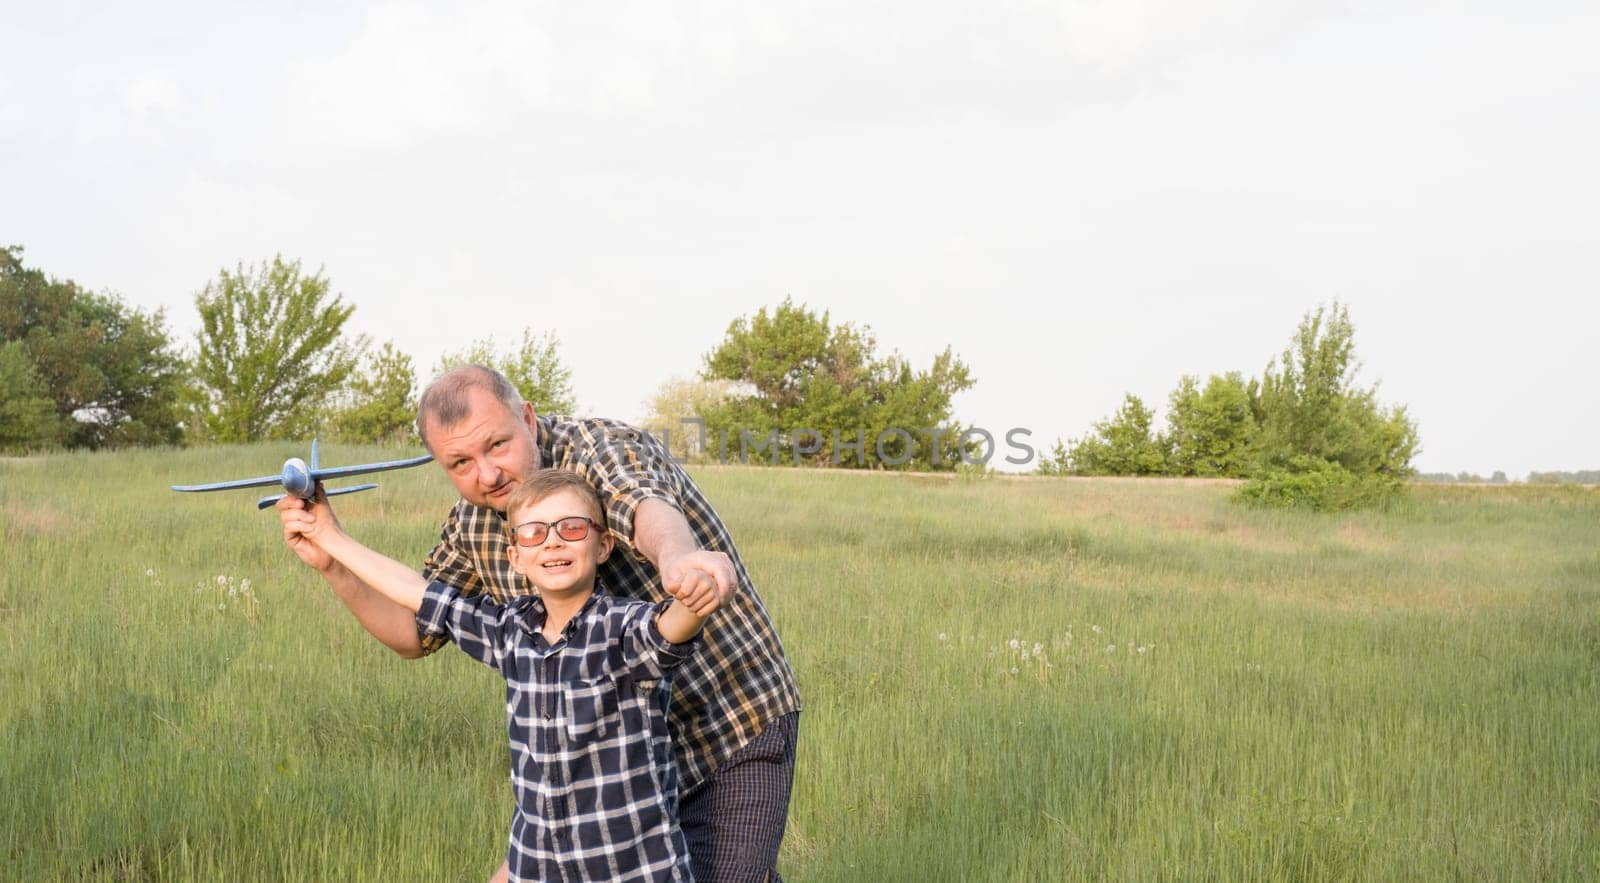 Father and son having fun in the field playing with an airplane by Ekaterina34